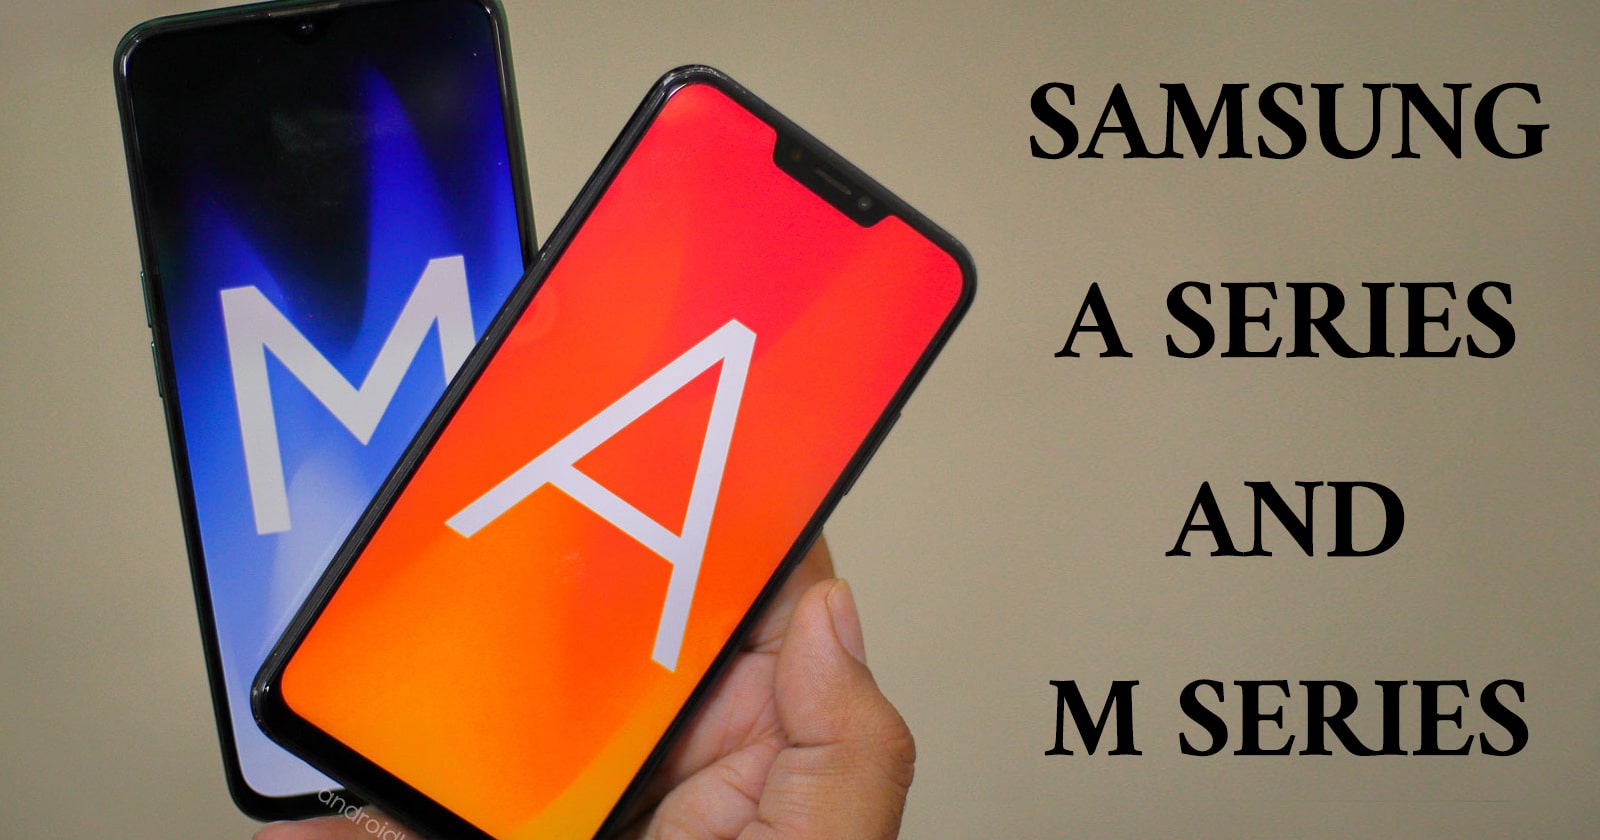 What Is Difference Between Samsung A Series and M Series